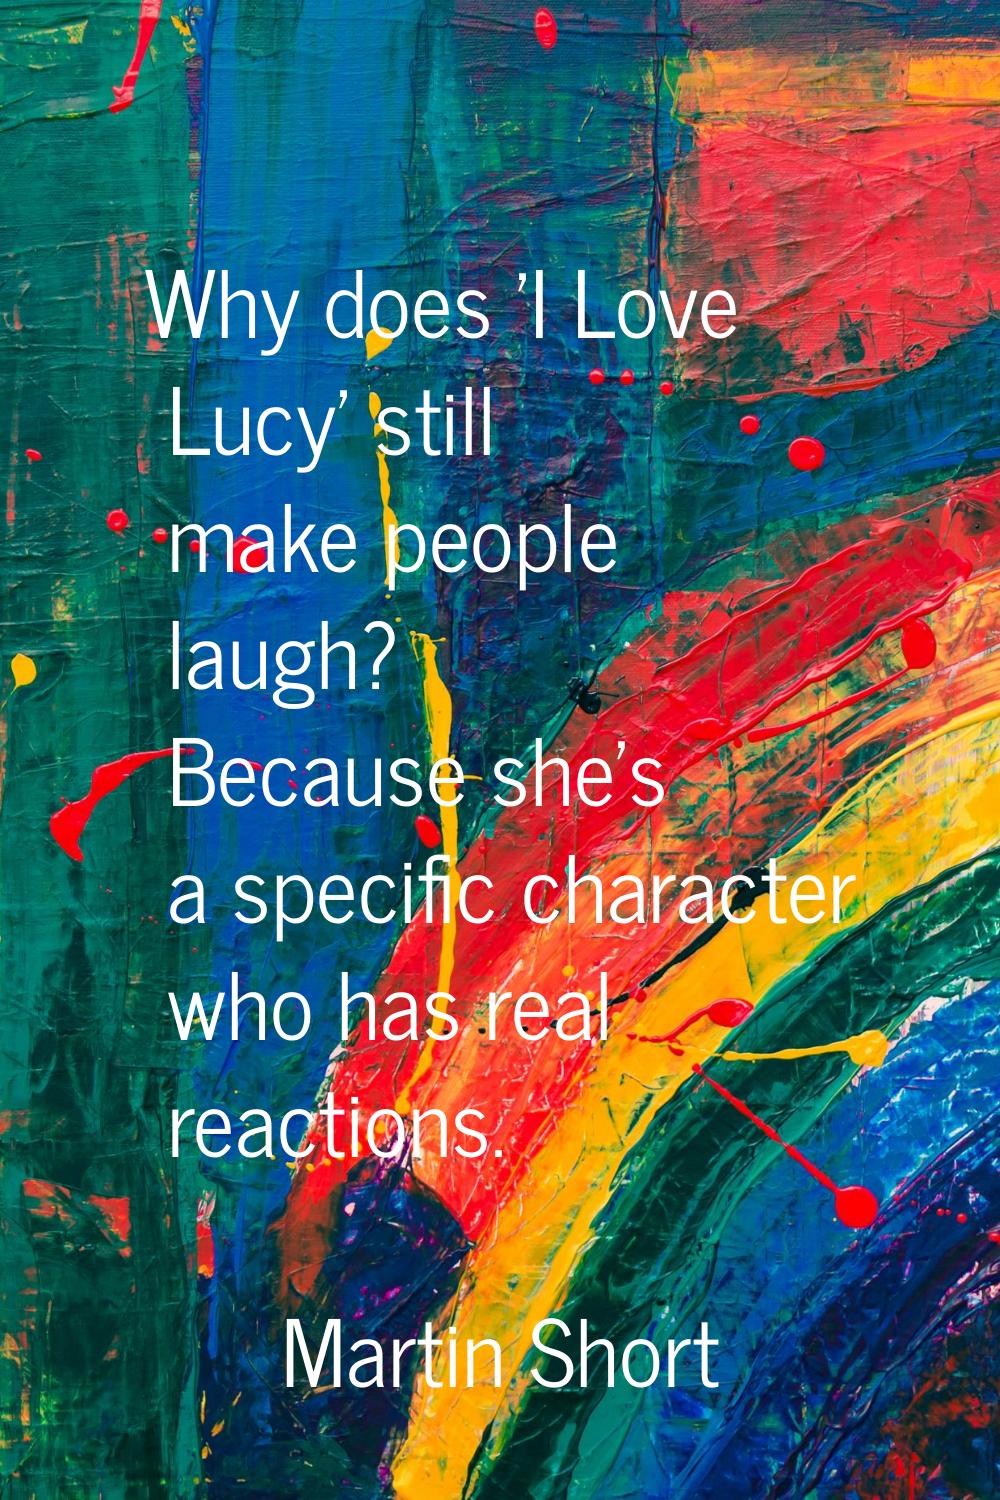 Why does 'I Love Lucy' still make people laugh? Because she's a specific character who has real rea